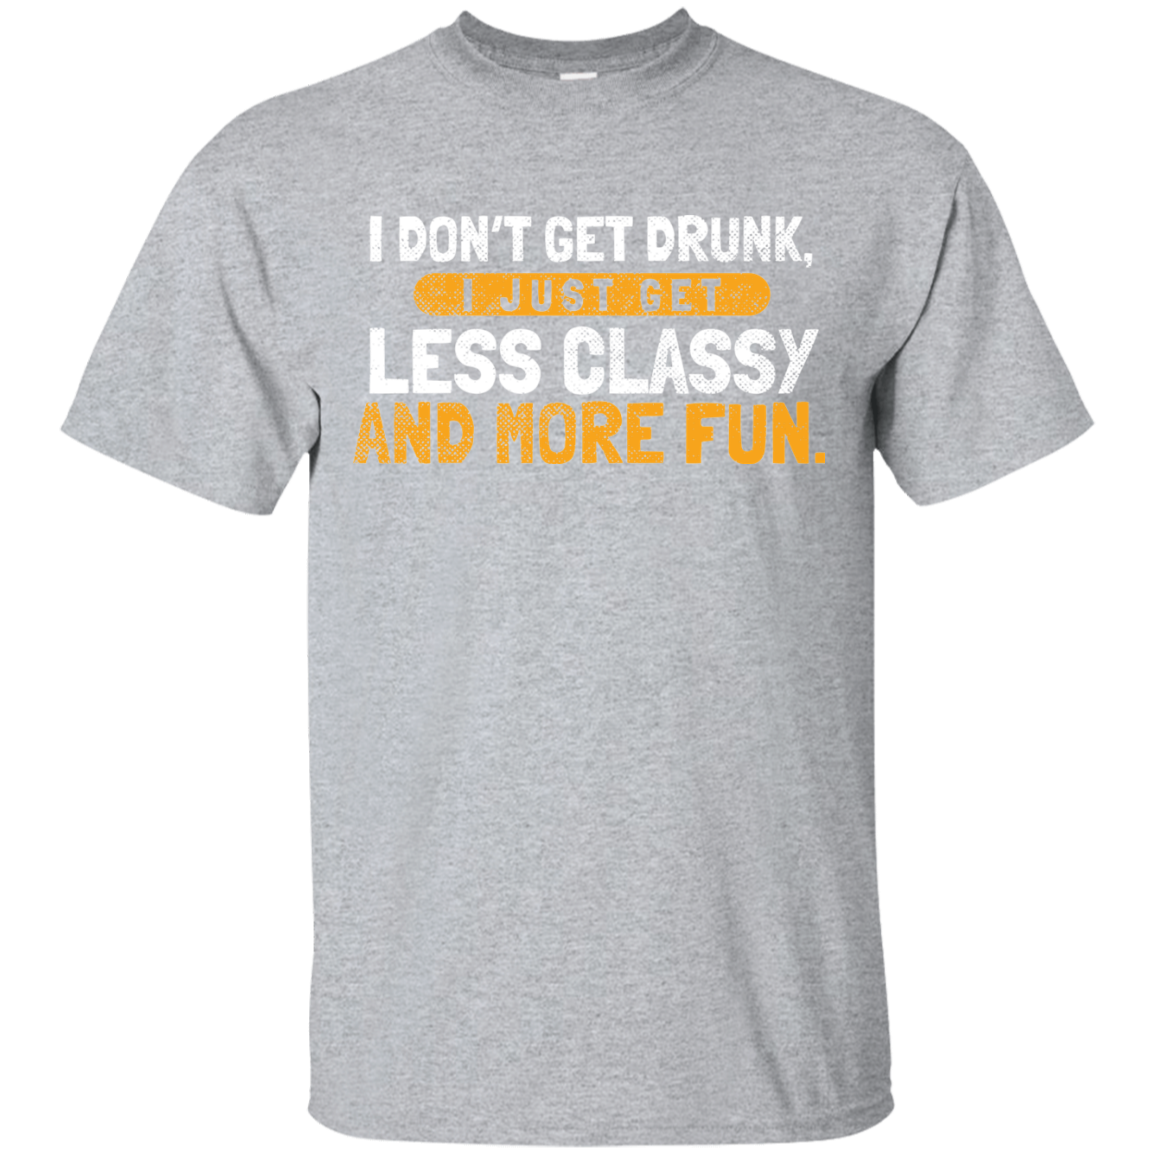 I Don't Get Drunk T-Shirt Apparel - The Beer Lodge